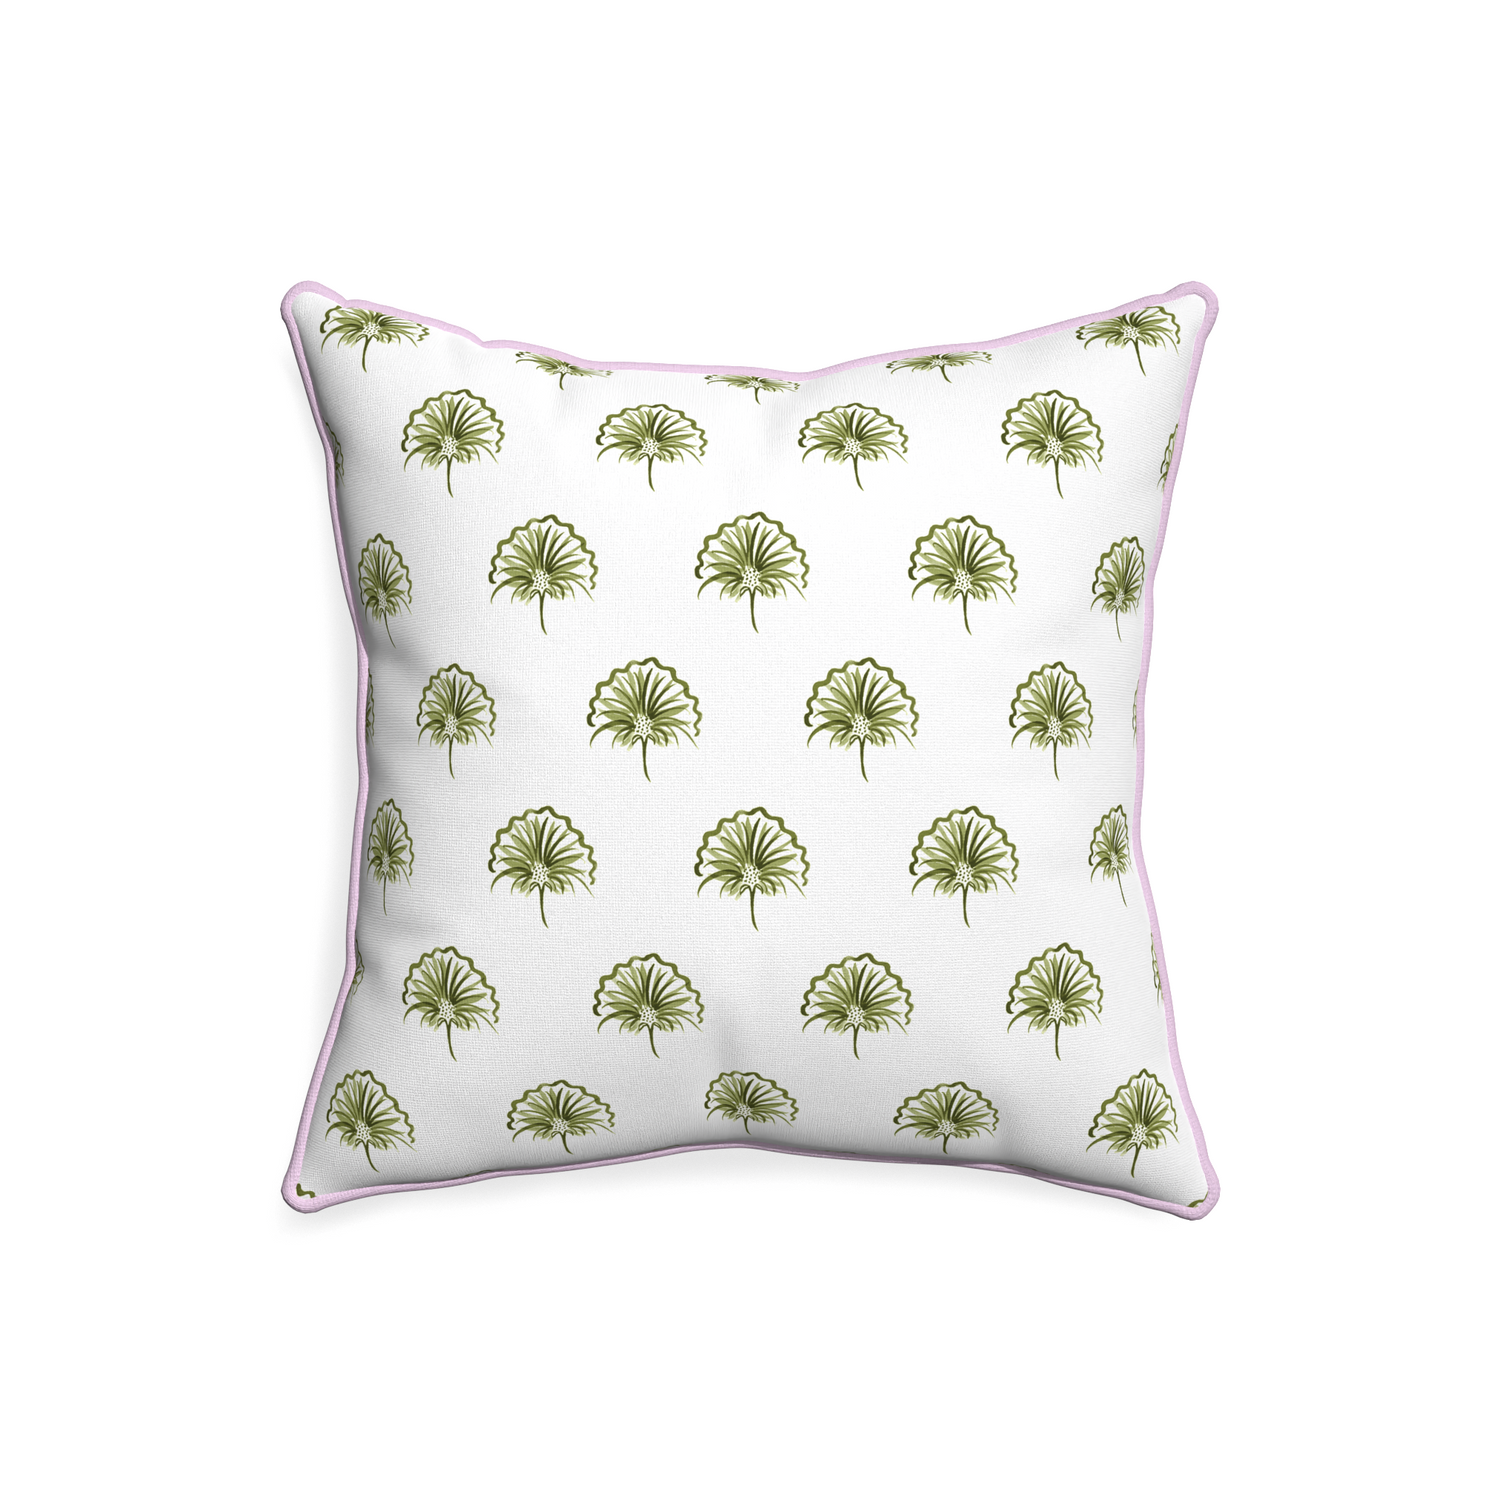 20-square penelope moss custom pillow with l piping on white background